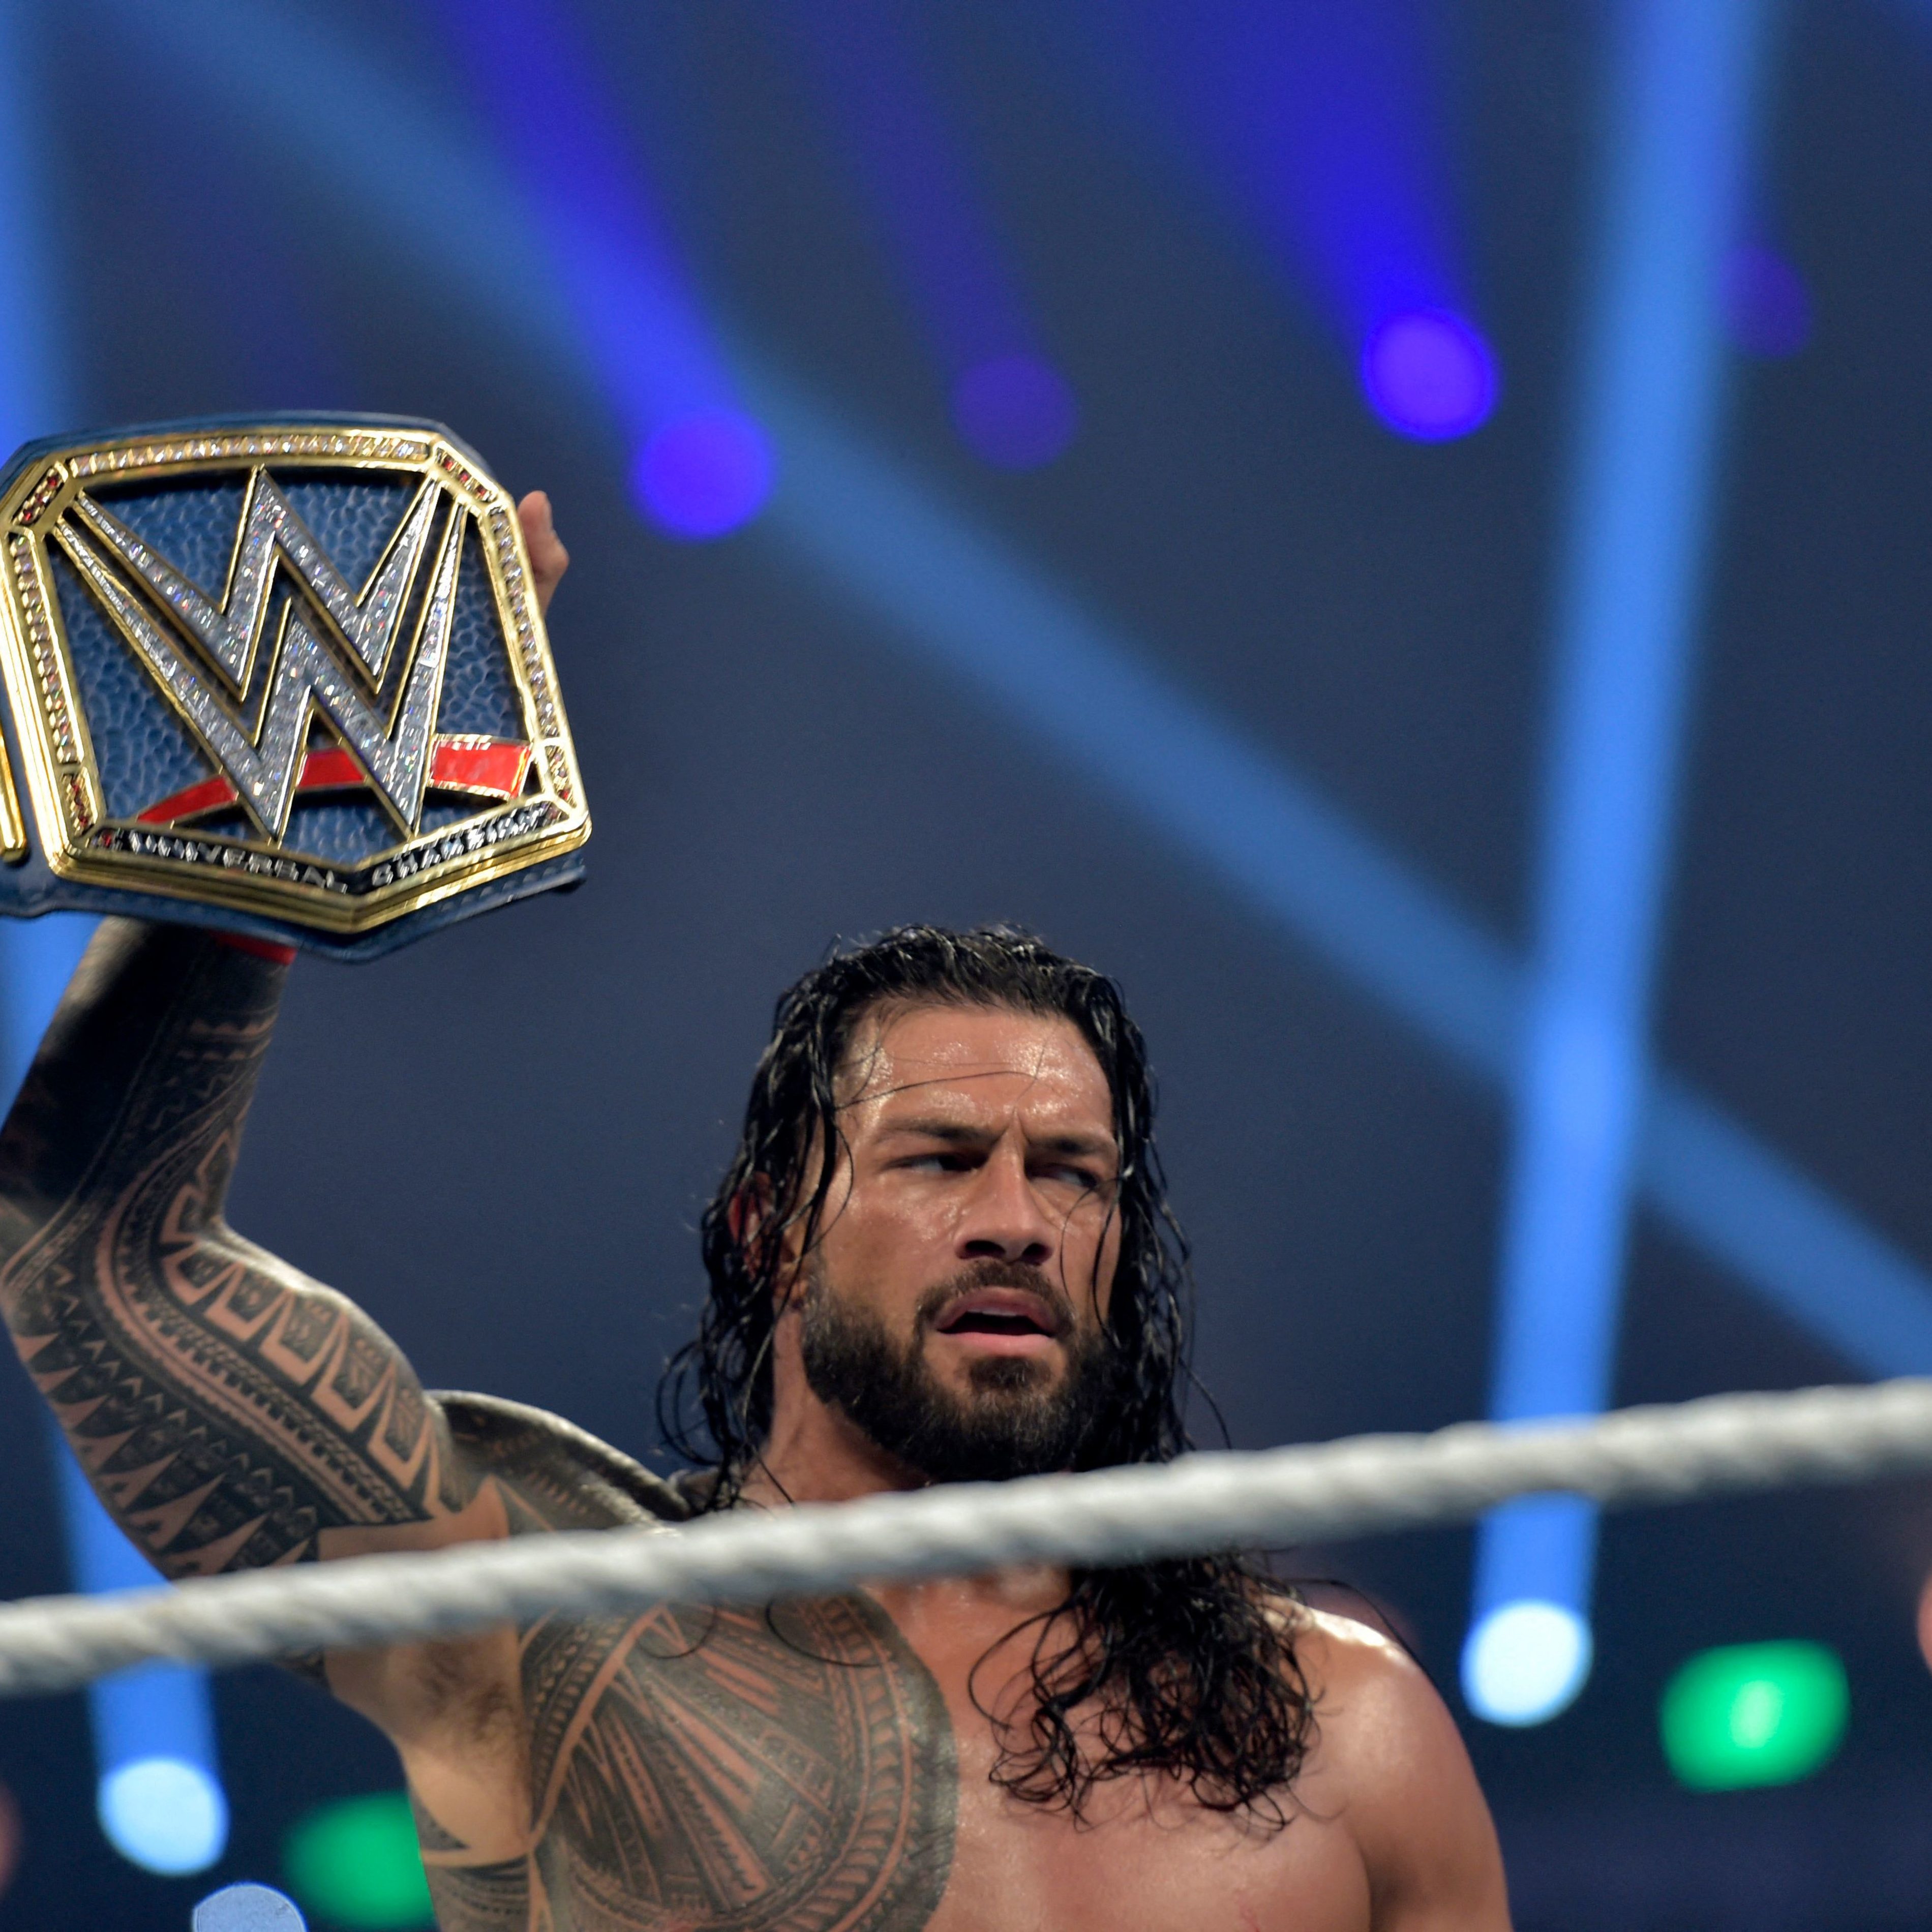 Roman Reigns Teases Leaving WWE During Live Show Before WrestleMania Backlash